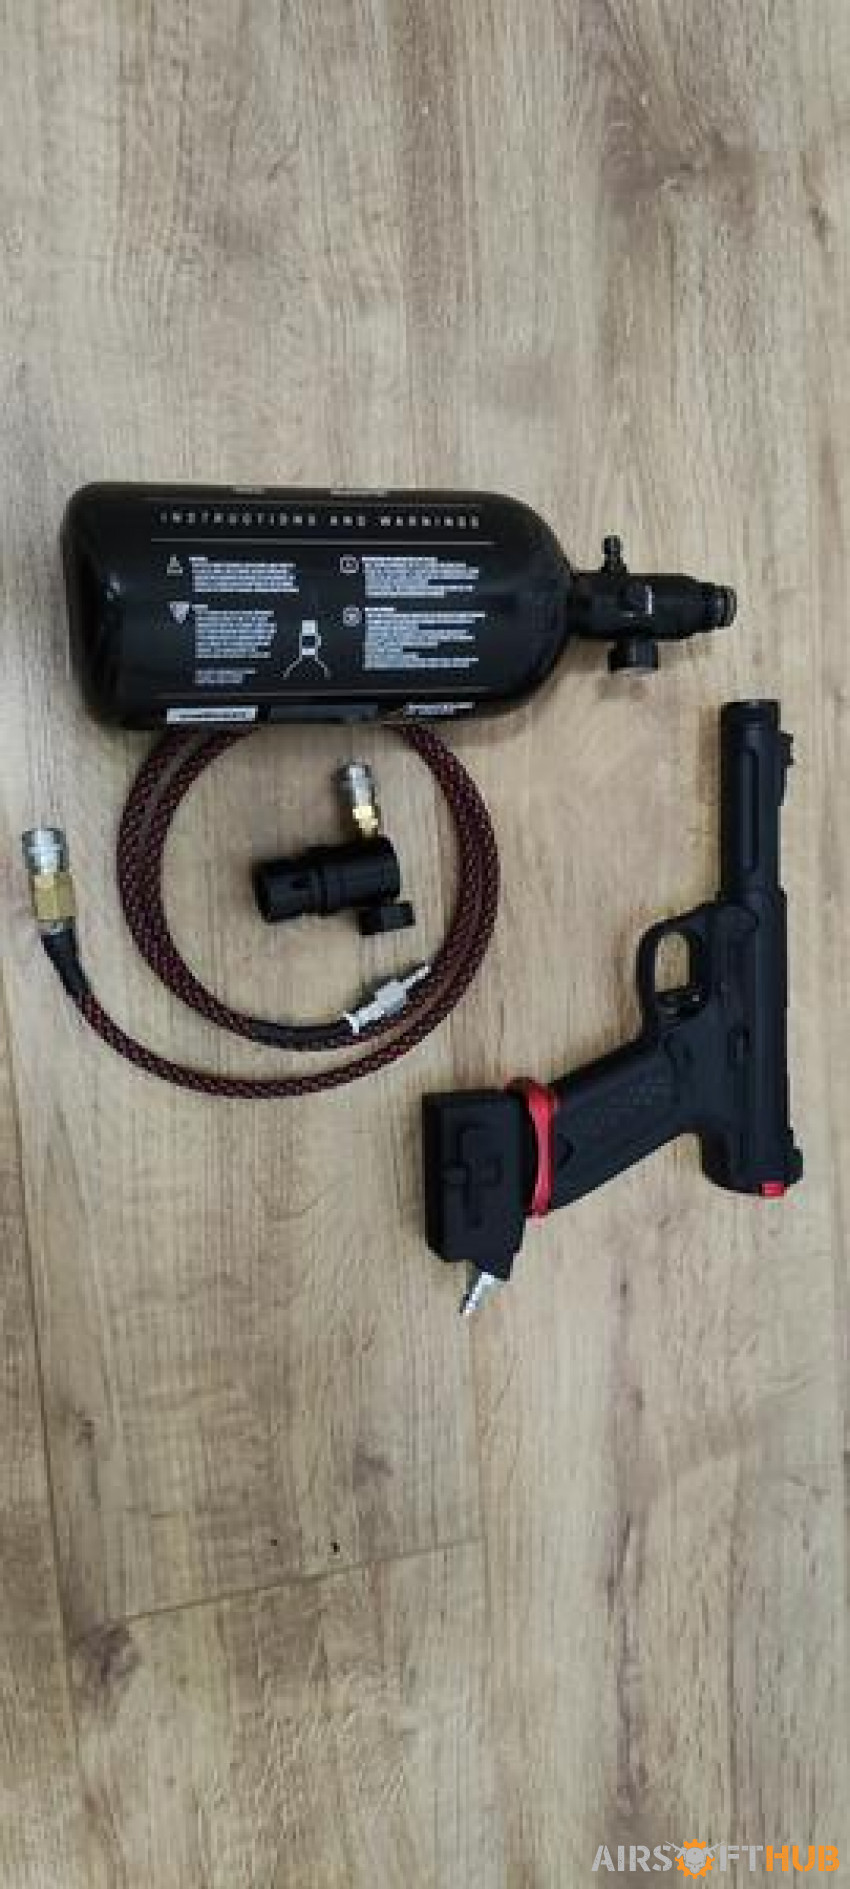 Aap hpa set up - Used airsoft equipment